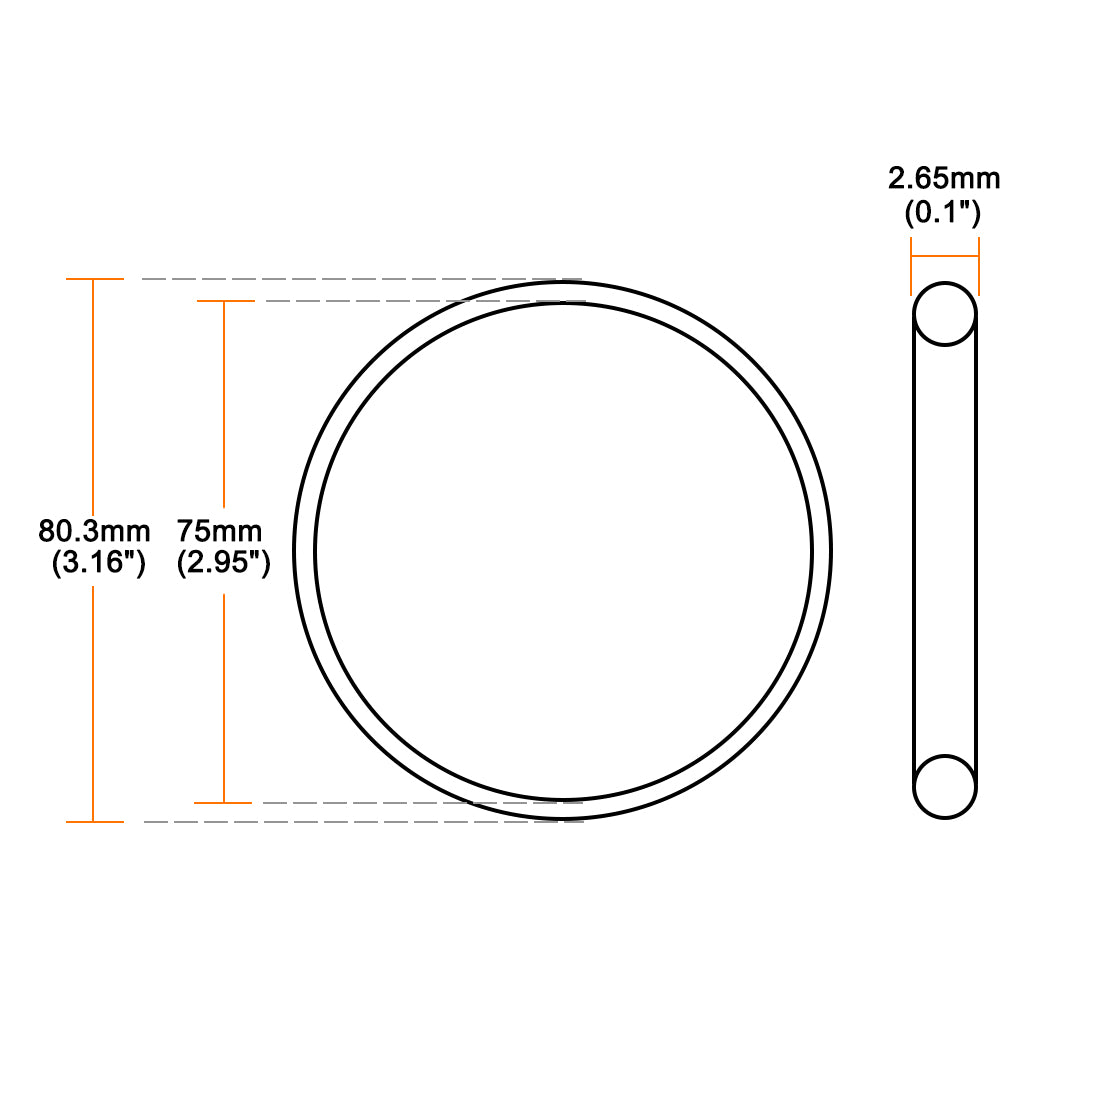 uxcell Uxcell O-Rings Fluorine Rubber 75mm x 80.3mm x 2.65mm Seal Rings Sealing Gasket